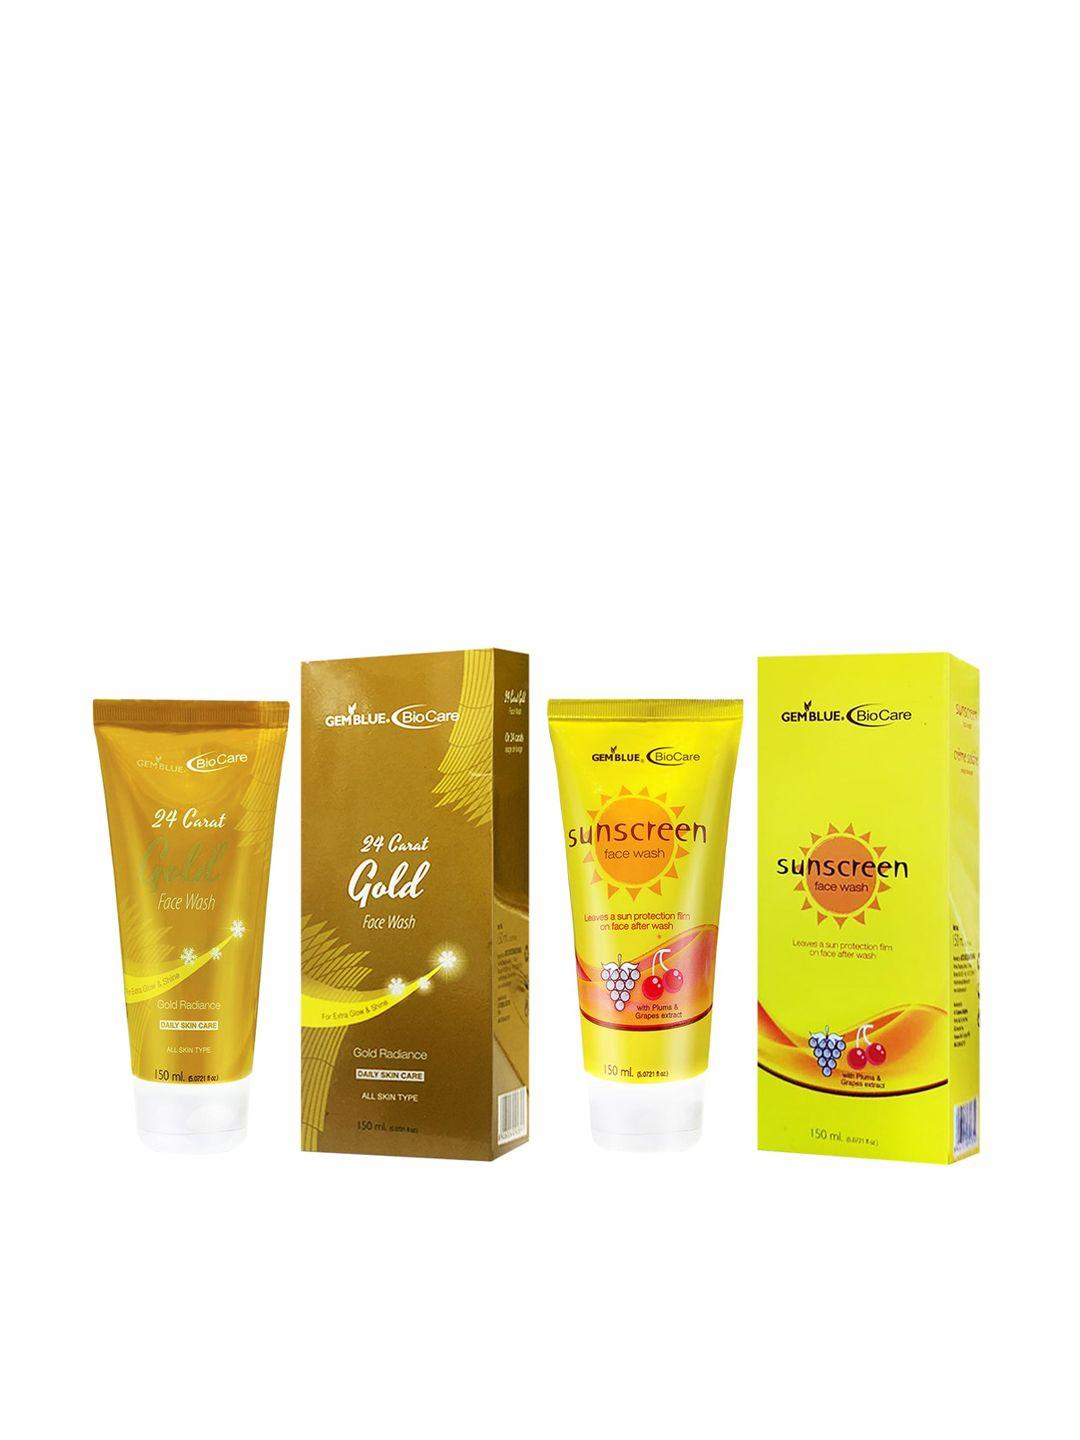 gemblue biocare unisex 24 carat gold and sunscreen face wash 150 ml each combo of 2